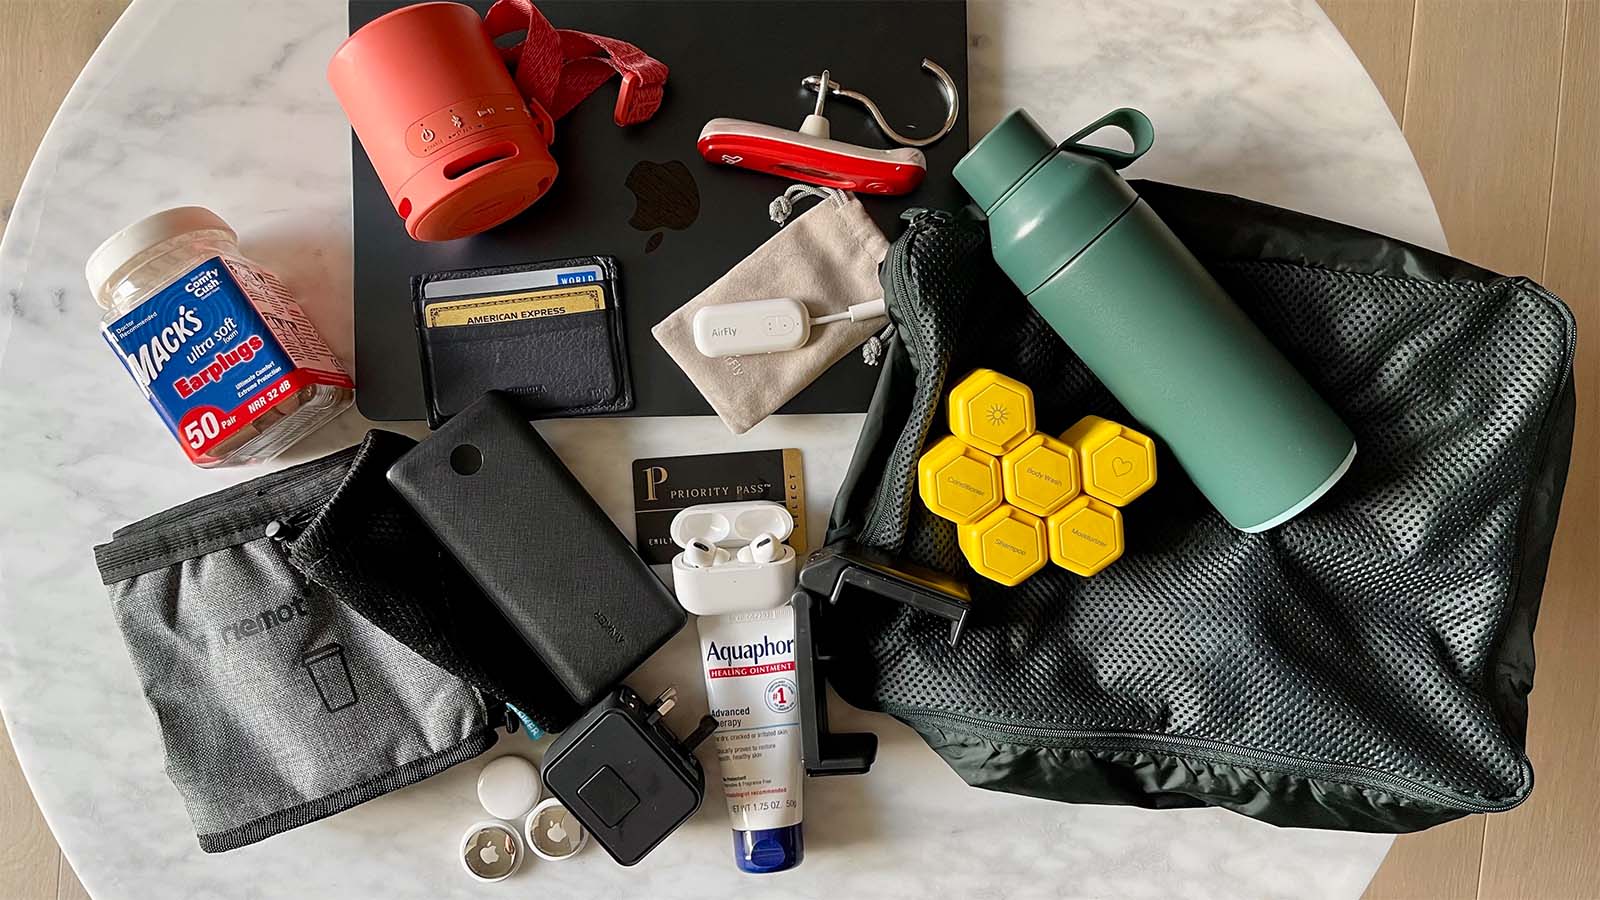 Essential Travel Products I Don't Leave Home Without - Jet Set